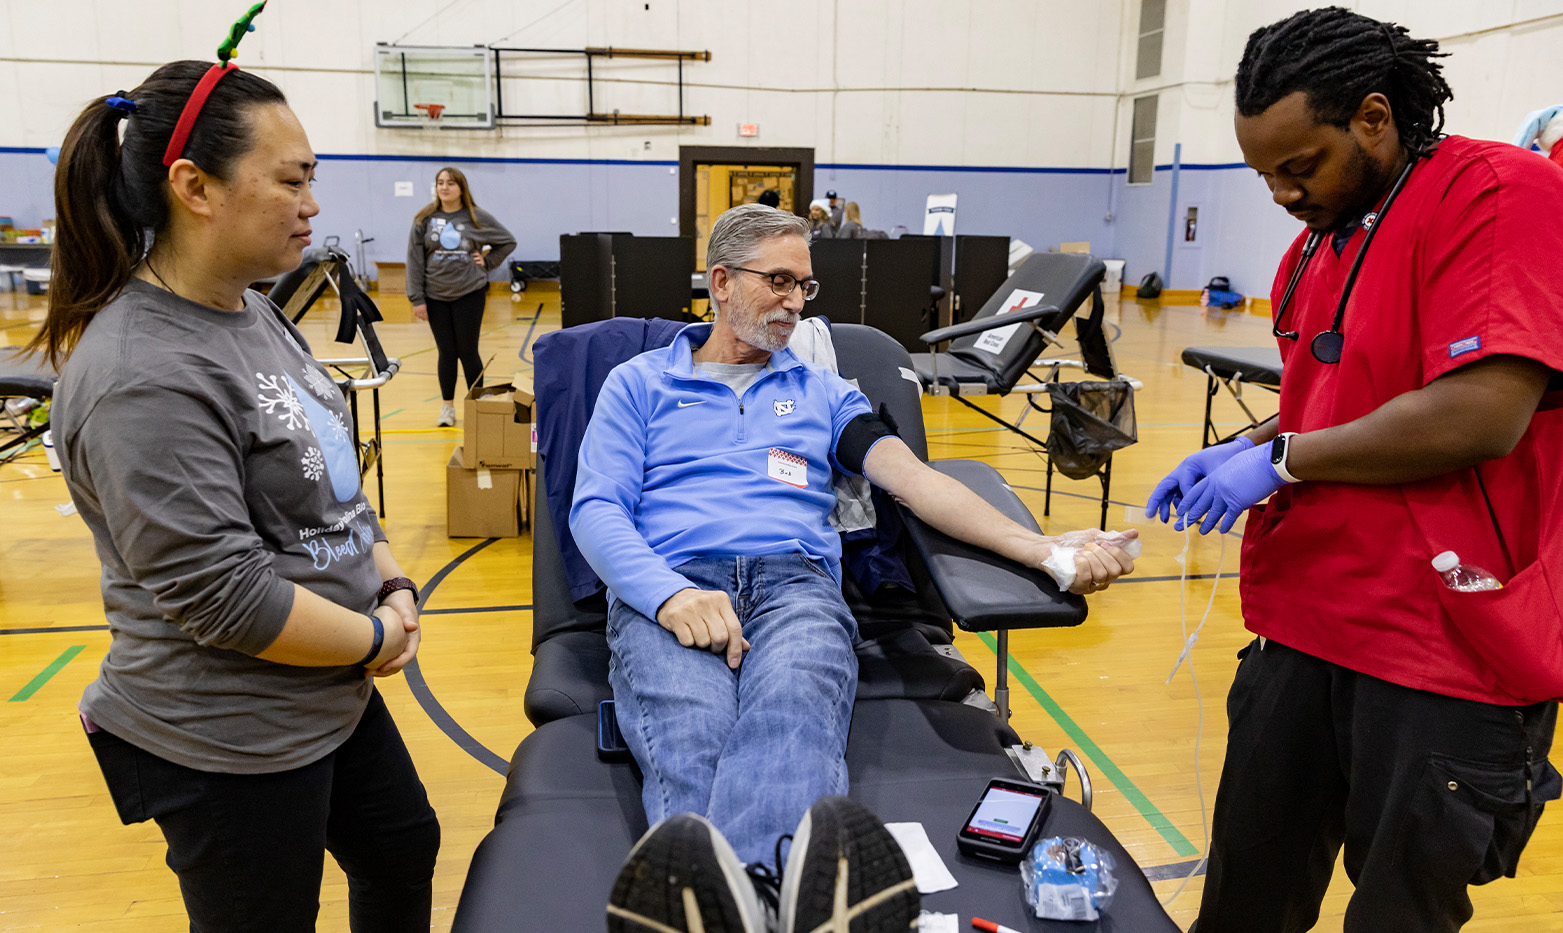 Two people stand next to a person donating blood.